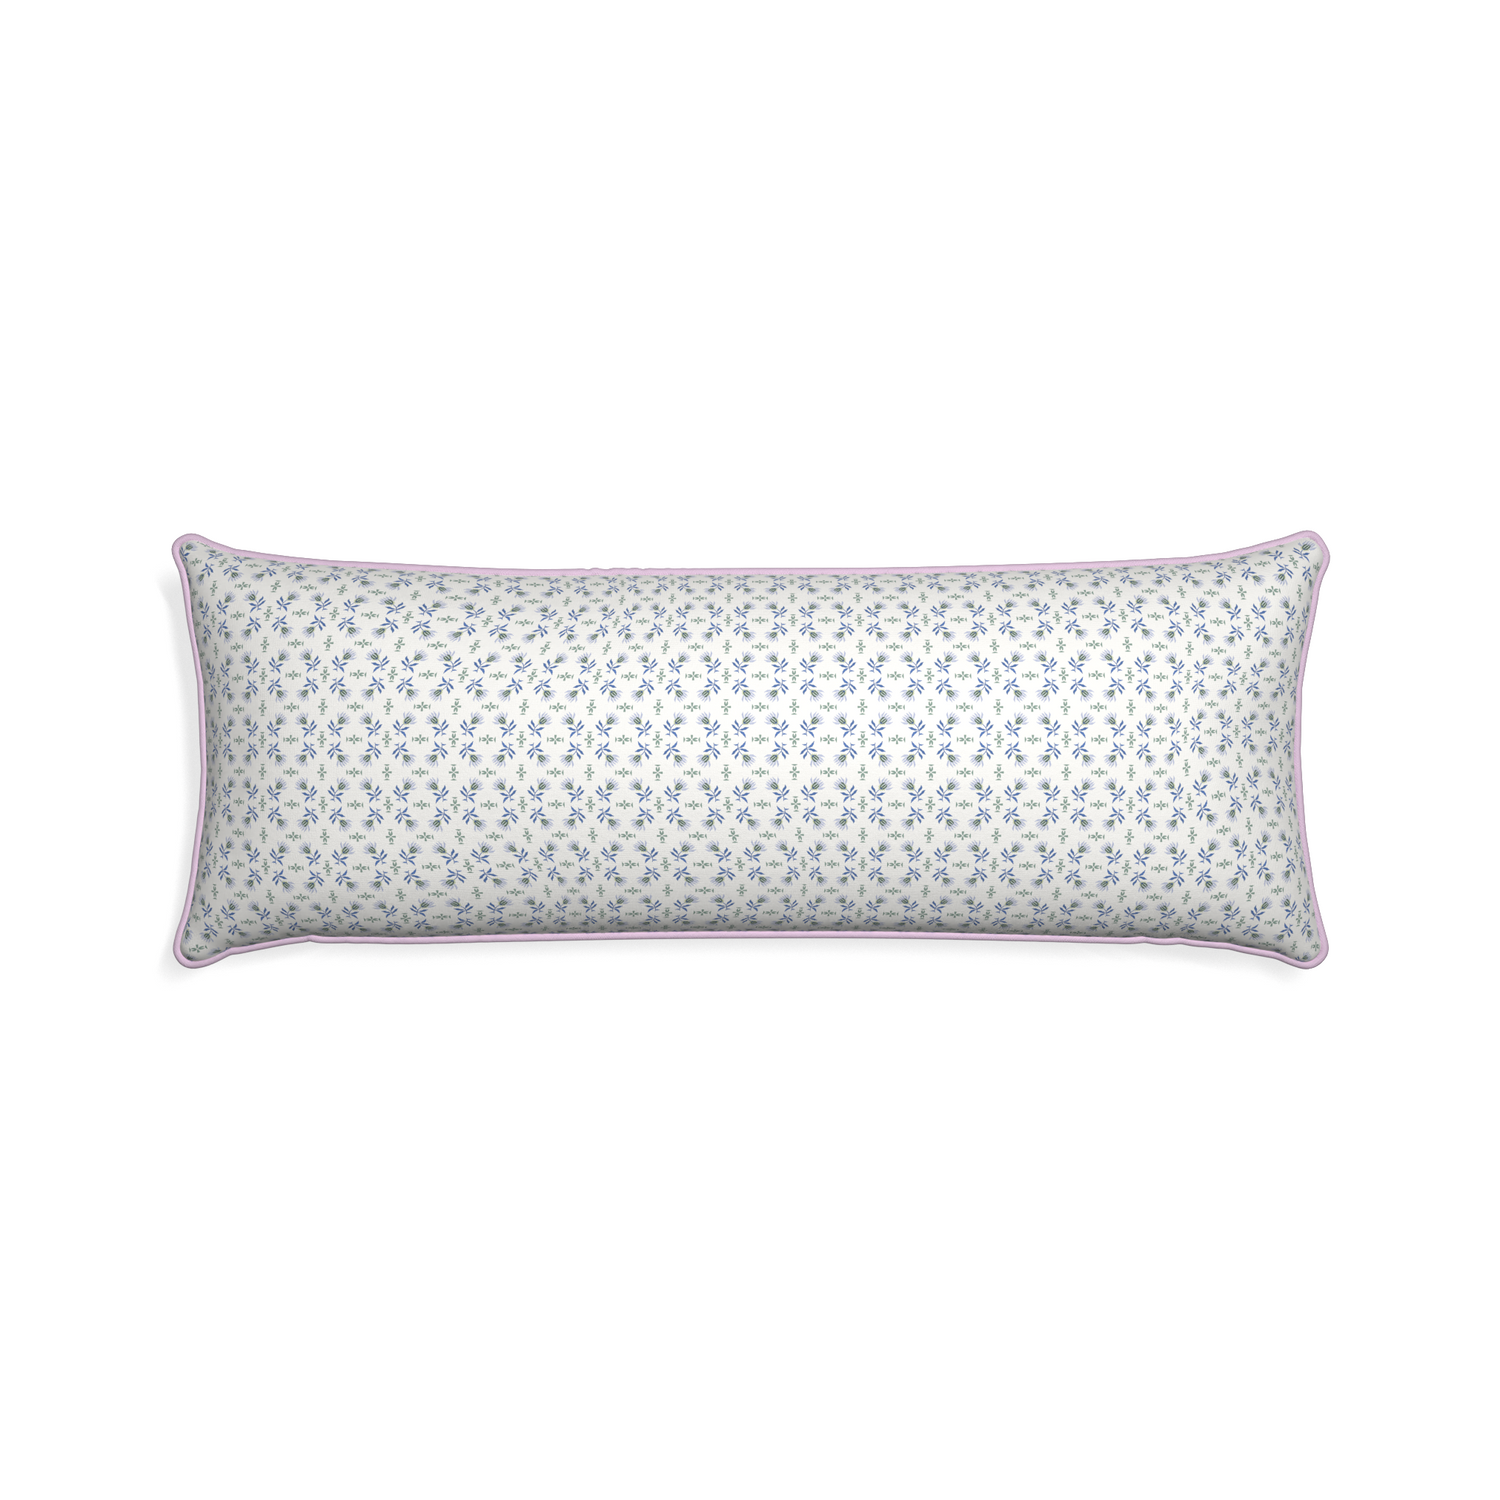 Xl-lumbar lee custom blue & green floralpillow with l piping on white background